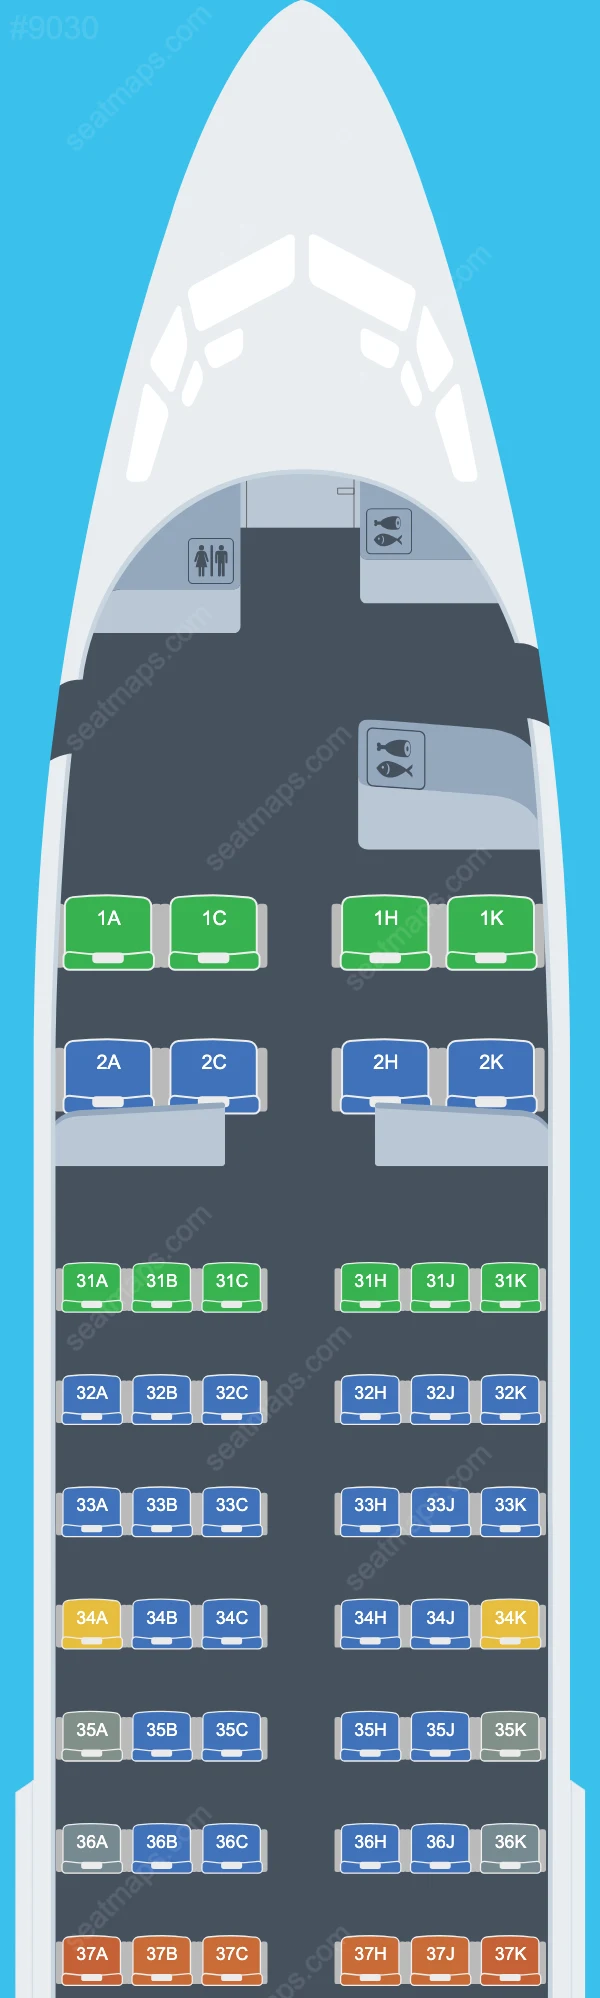 China Southern Boeing 737 Seat Maps 737-300 V.2